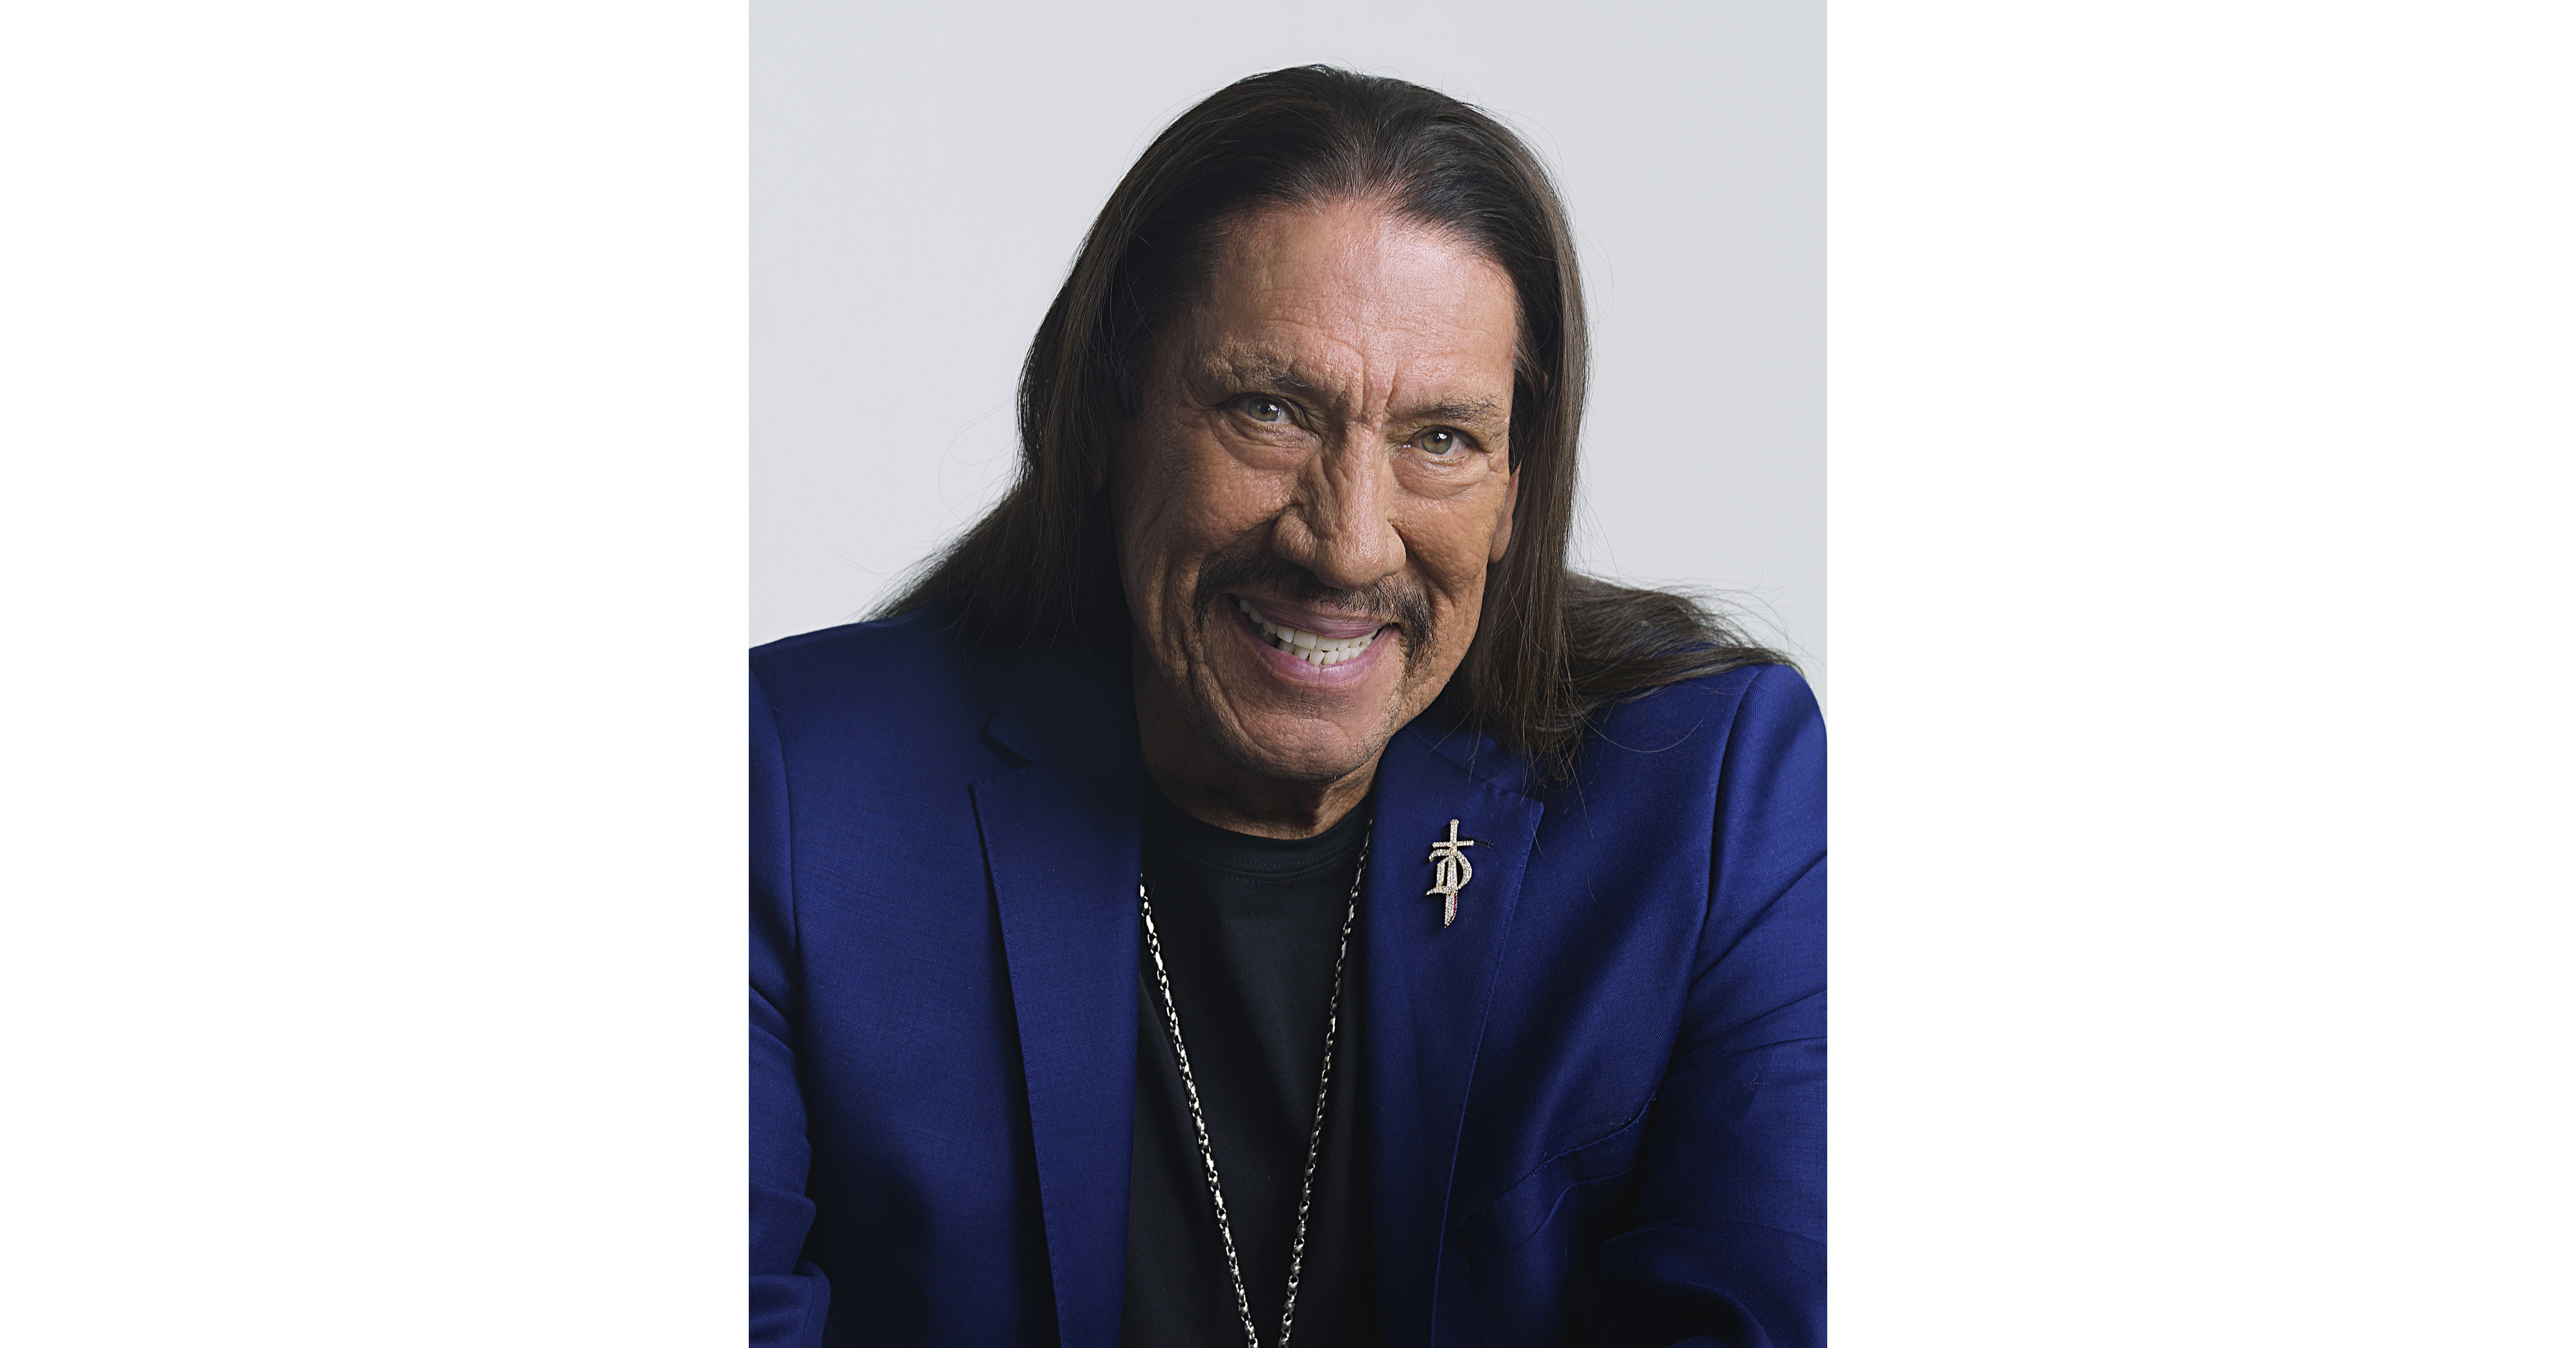 Danny Trejo Announced As Grand Marshal Of Historic 90th Anniversary Of The Hollywood Christmas 